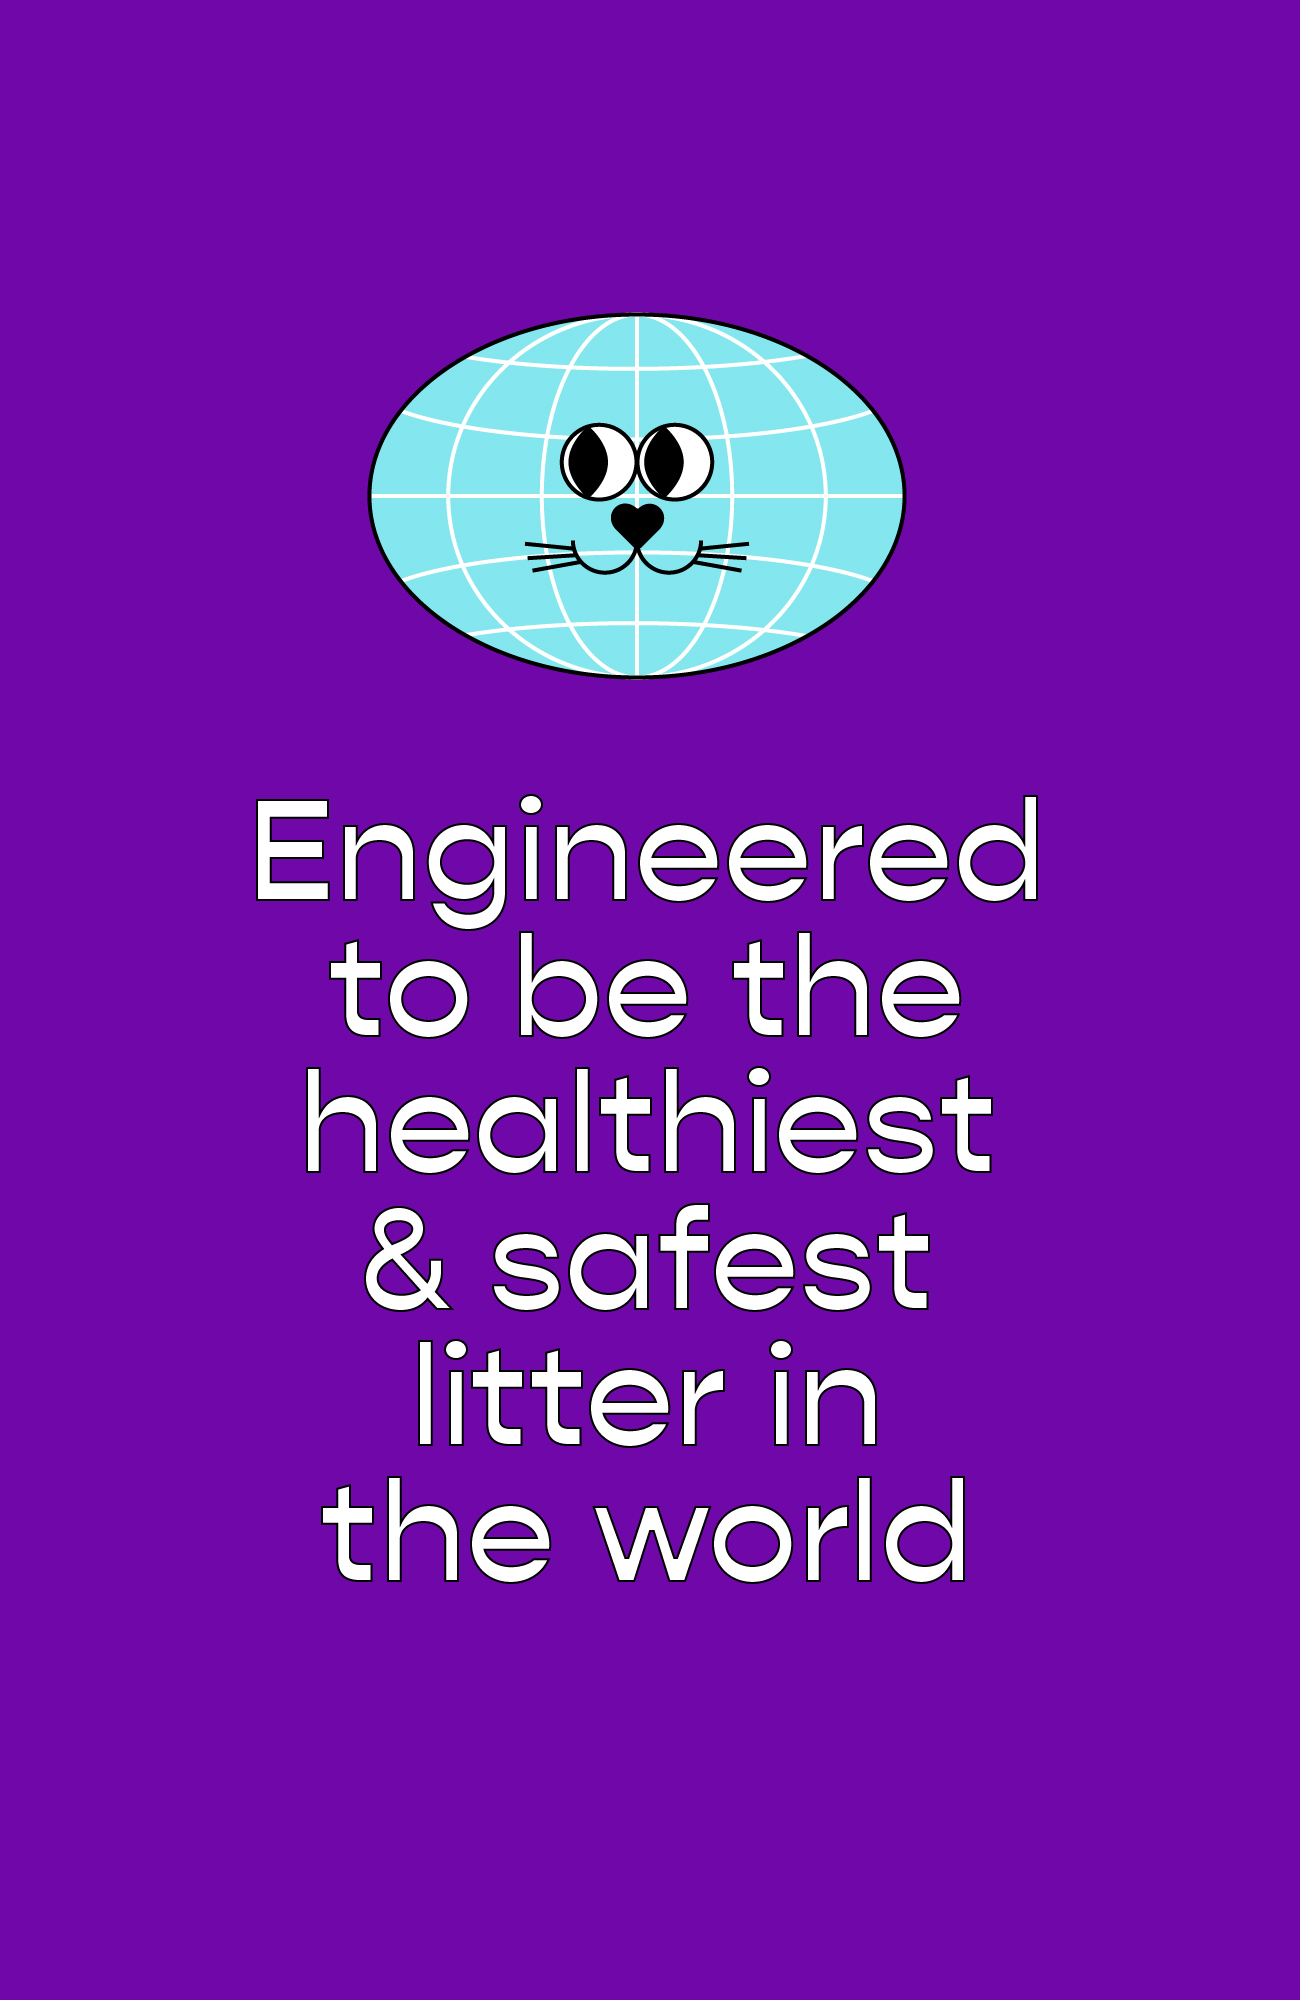 Engineered to be the healthiest and safest litter in the world